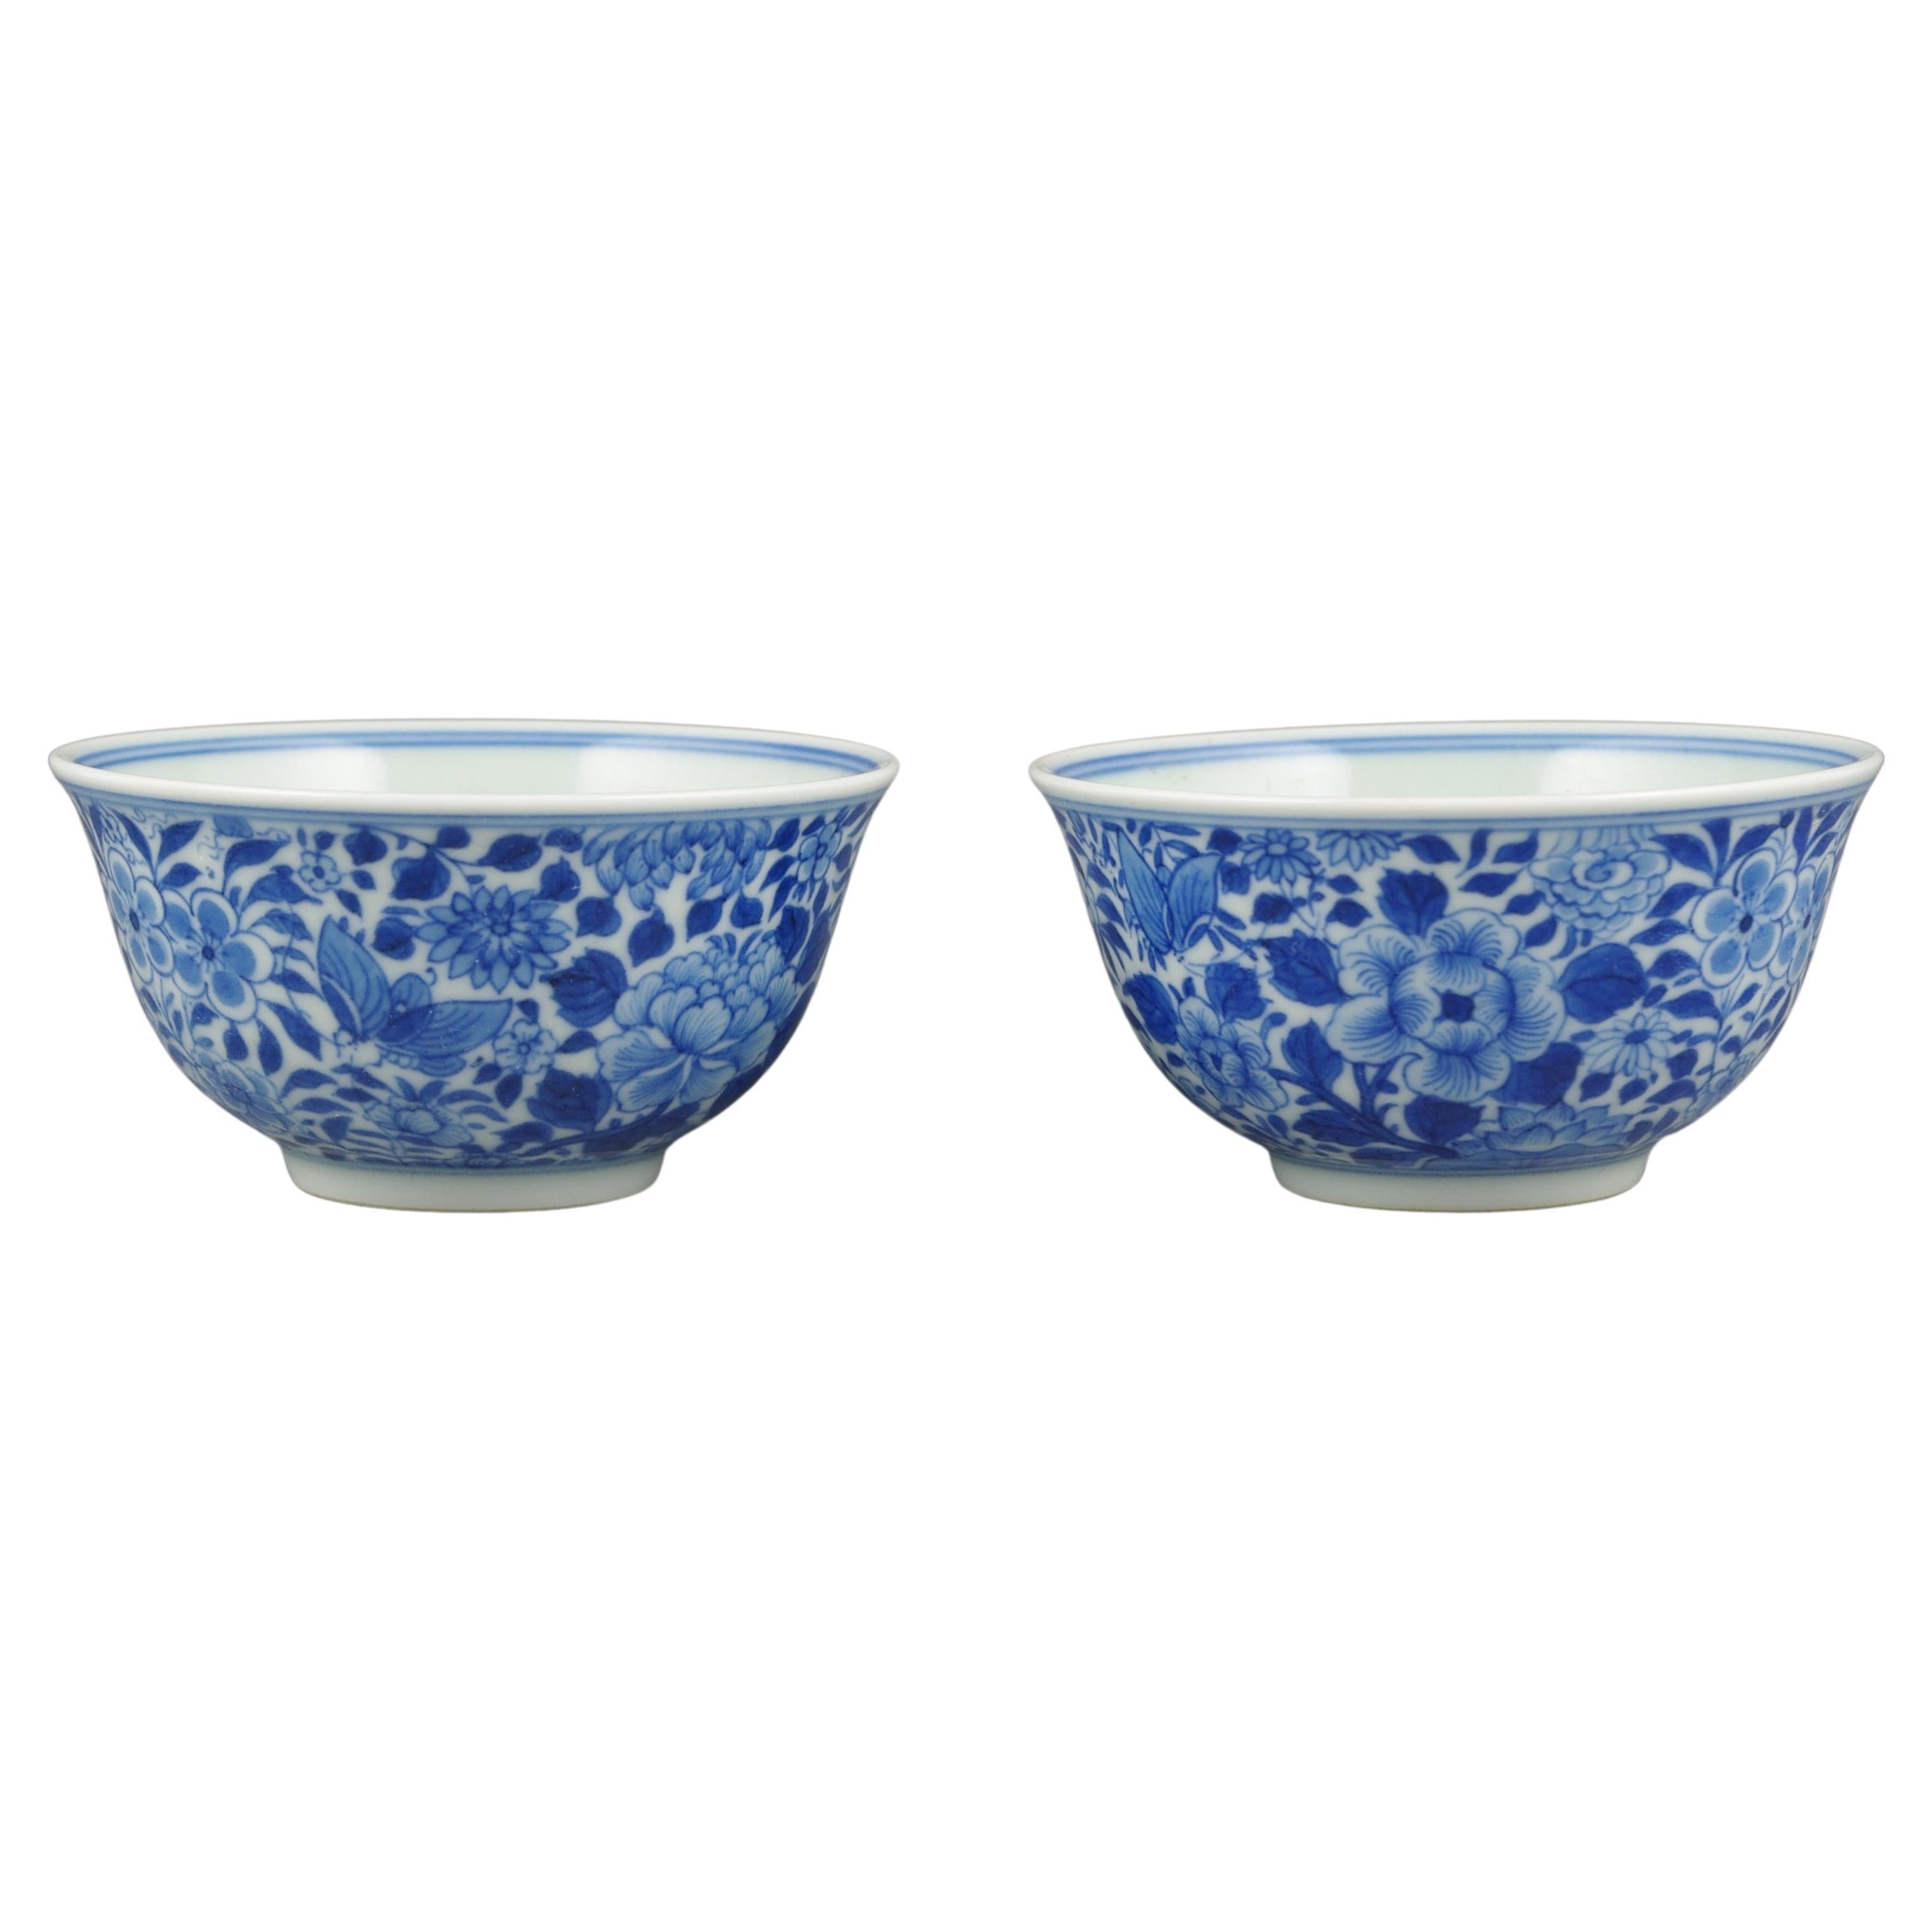 Qing Chinese Porcelain Blue & White Very Fine Mille Fleur Small Bowls Pair Modern 20c